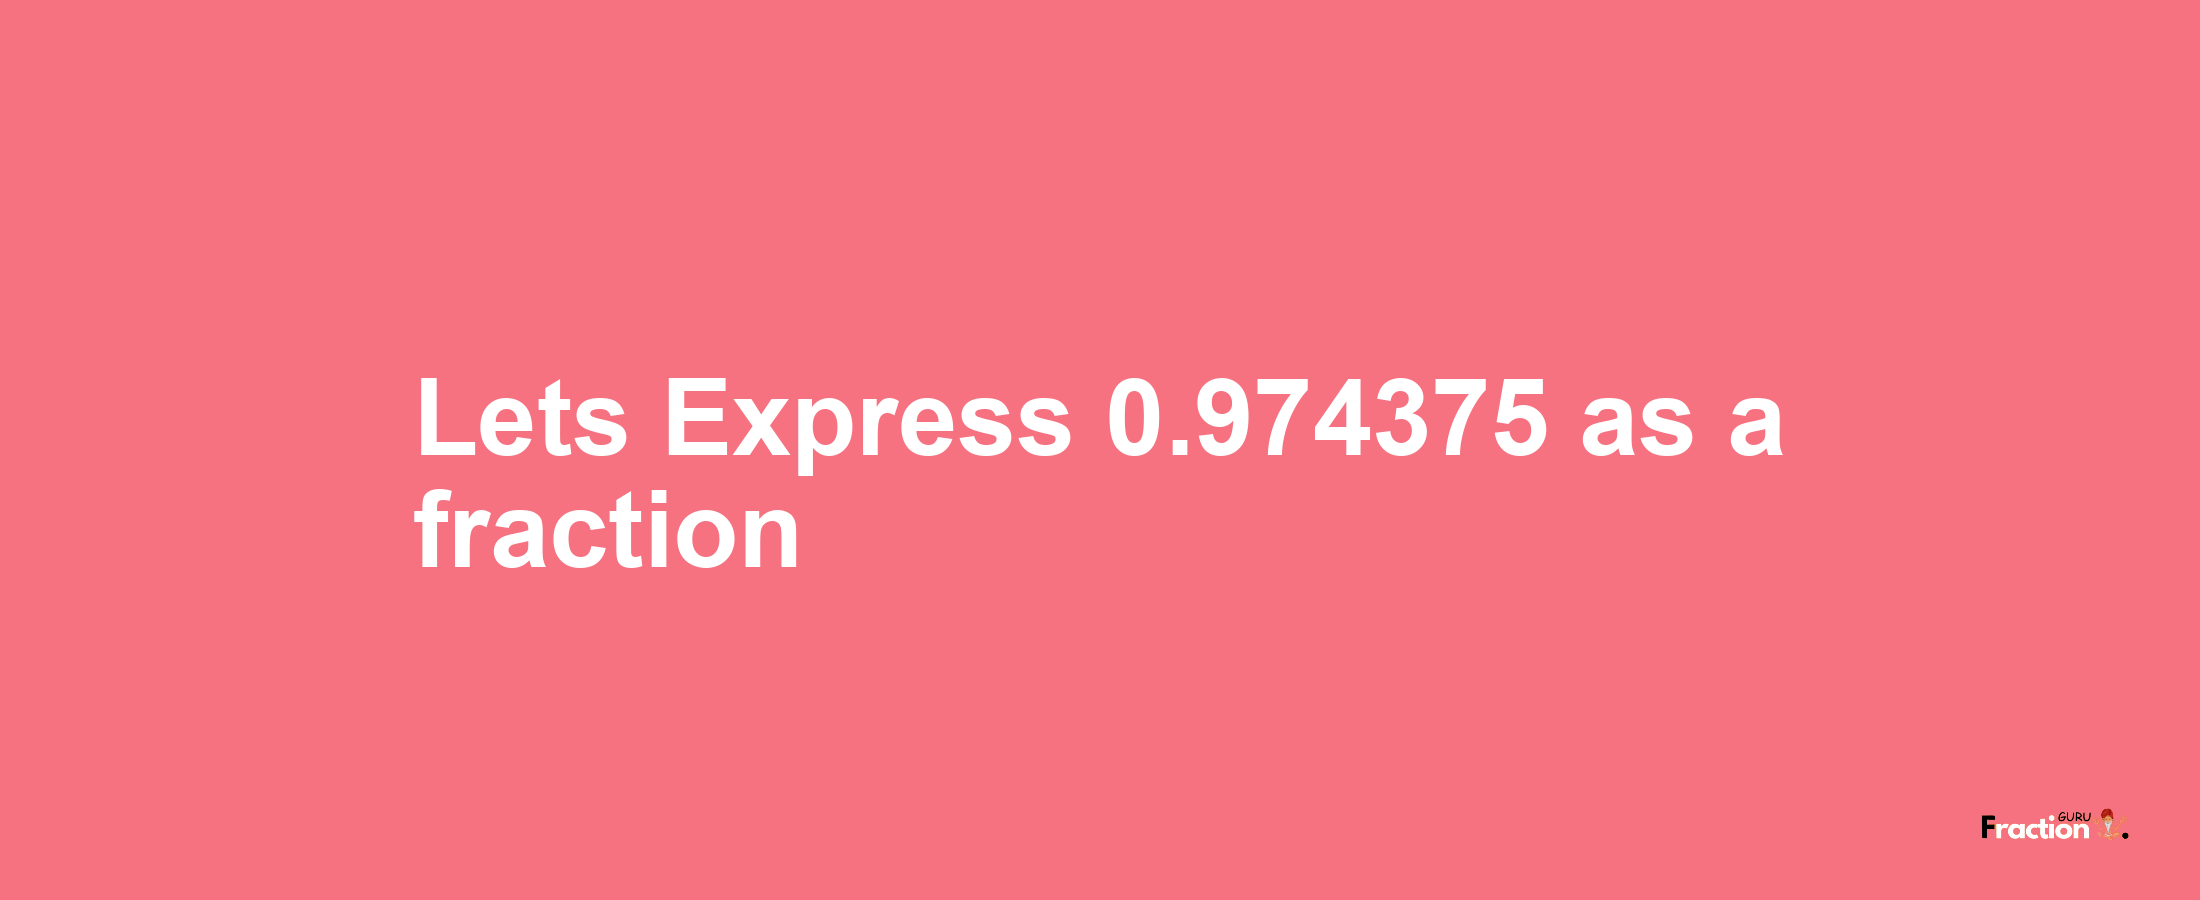 Lets Express 0.974375 as afraction